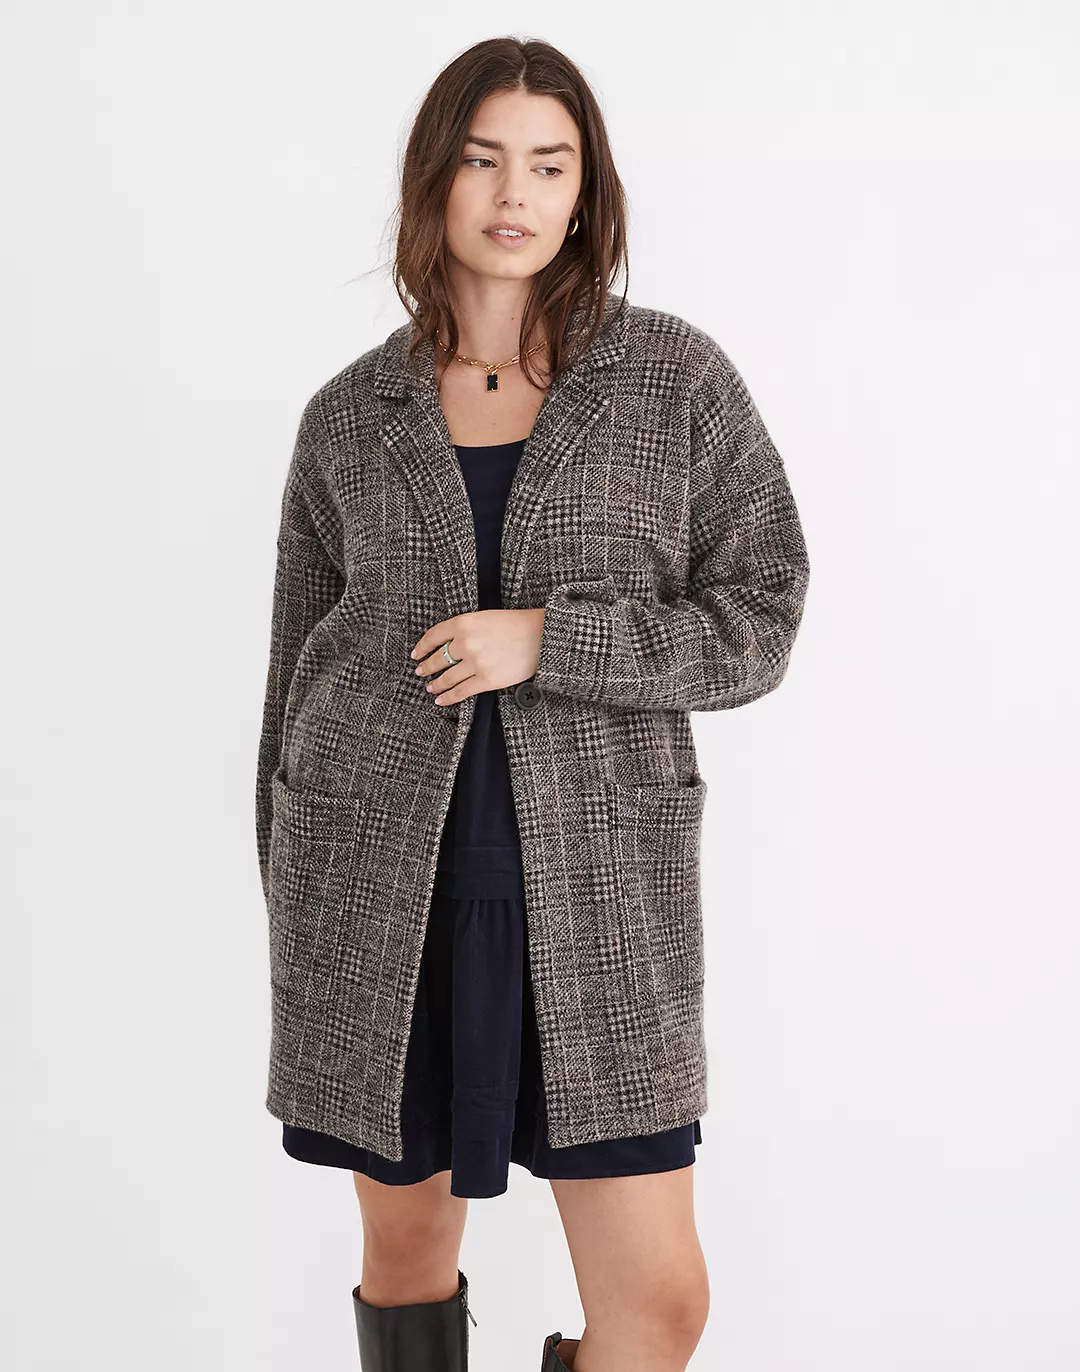 21 Best Wool Coats For Keeping Warm And Fashionable